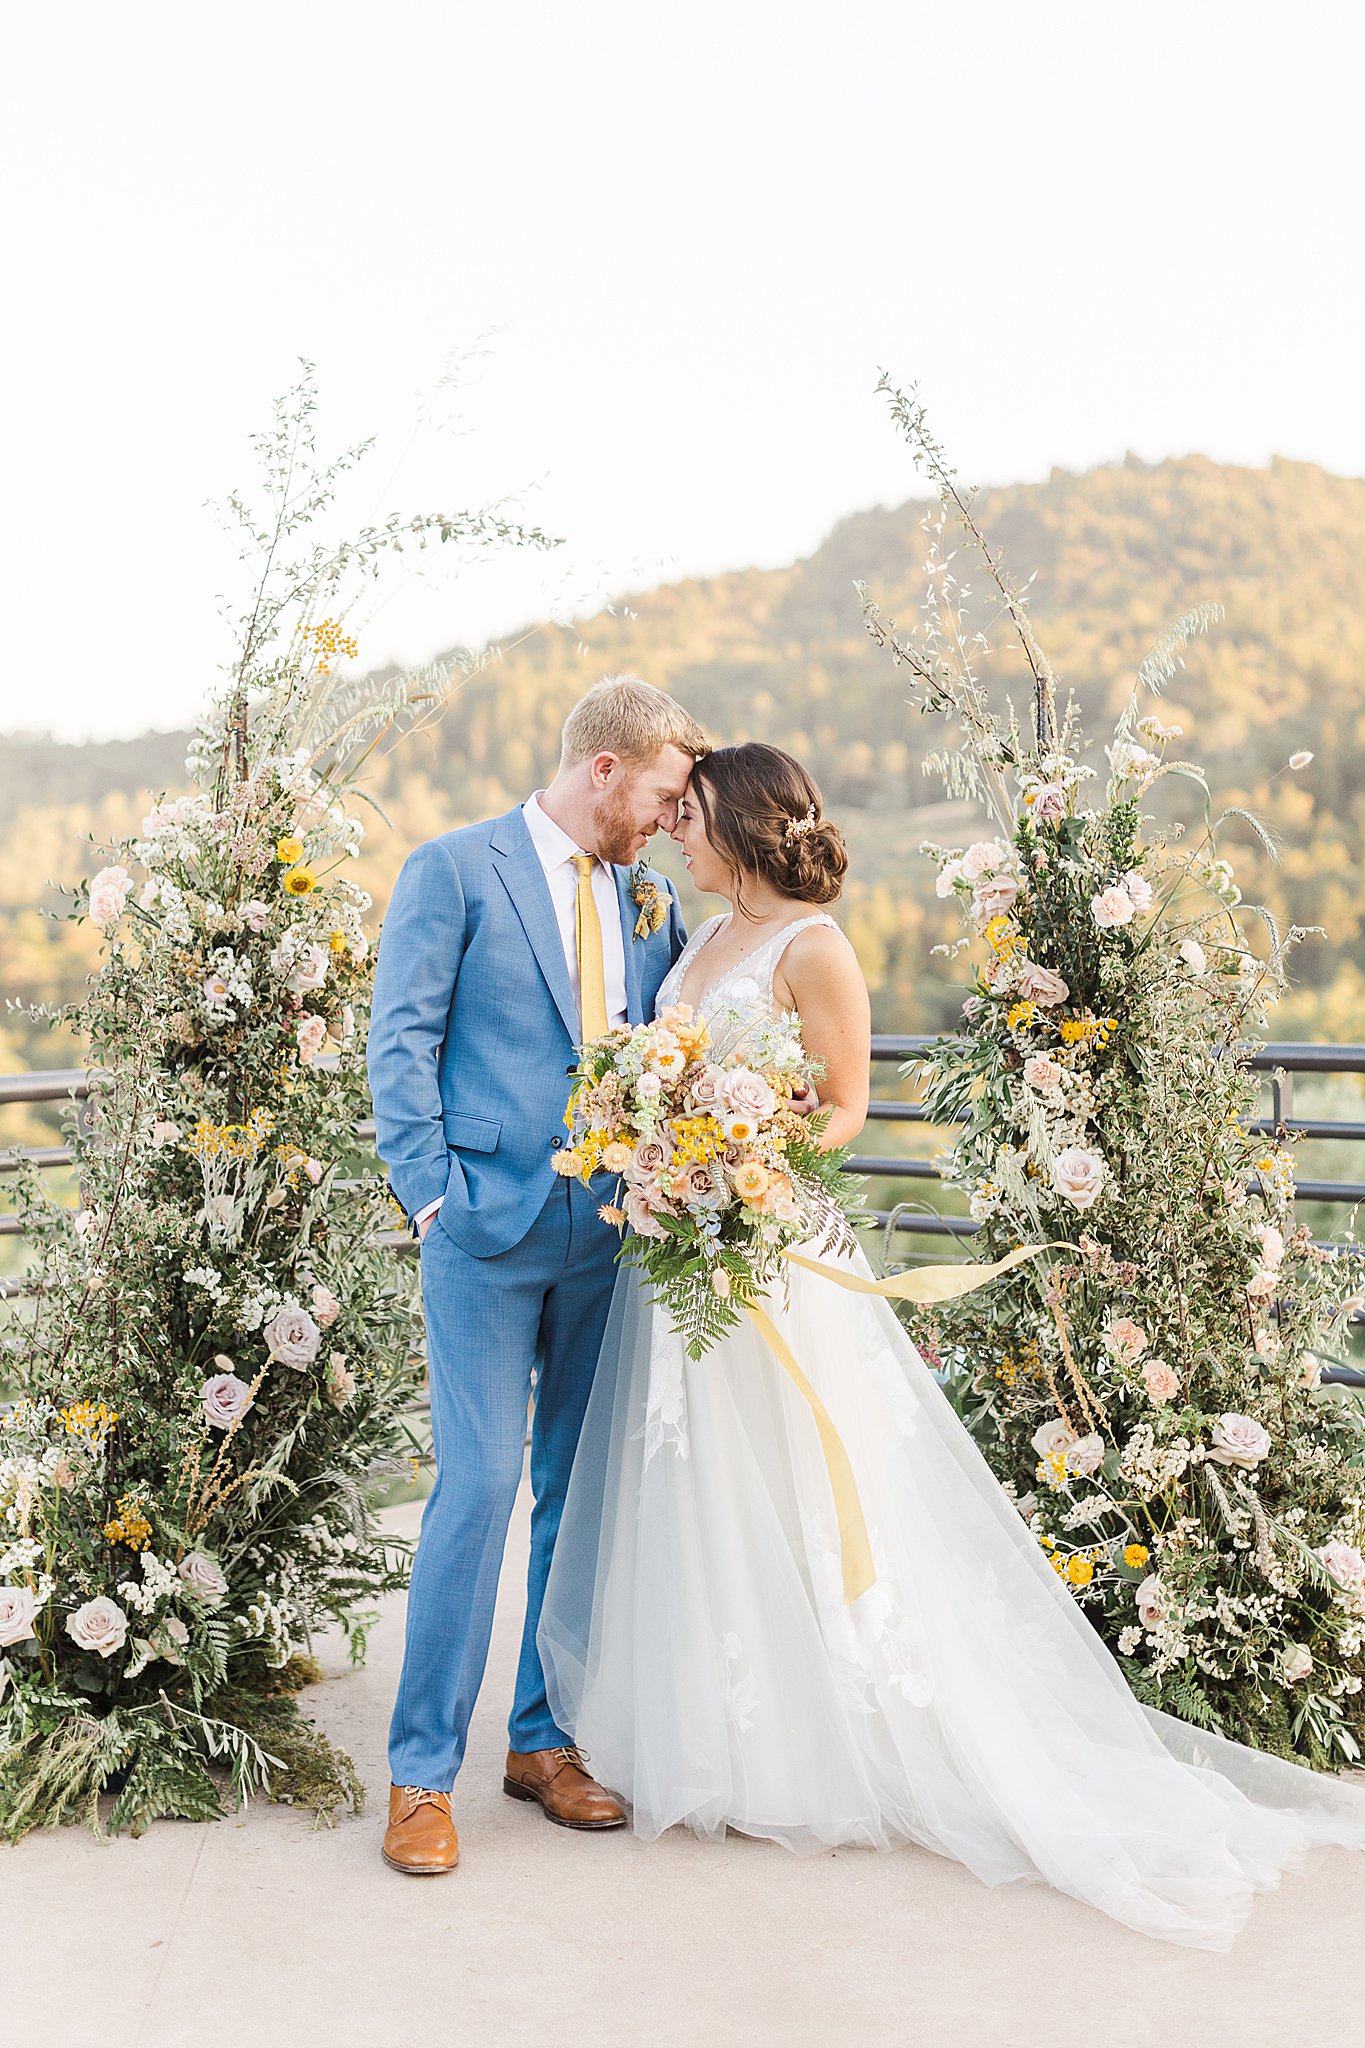 Summer wedding in the dry creek valley california